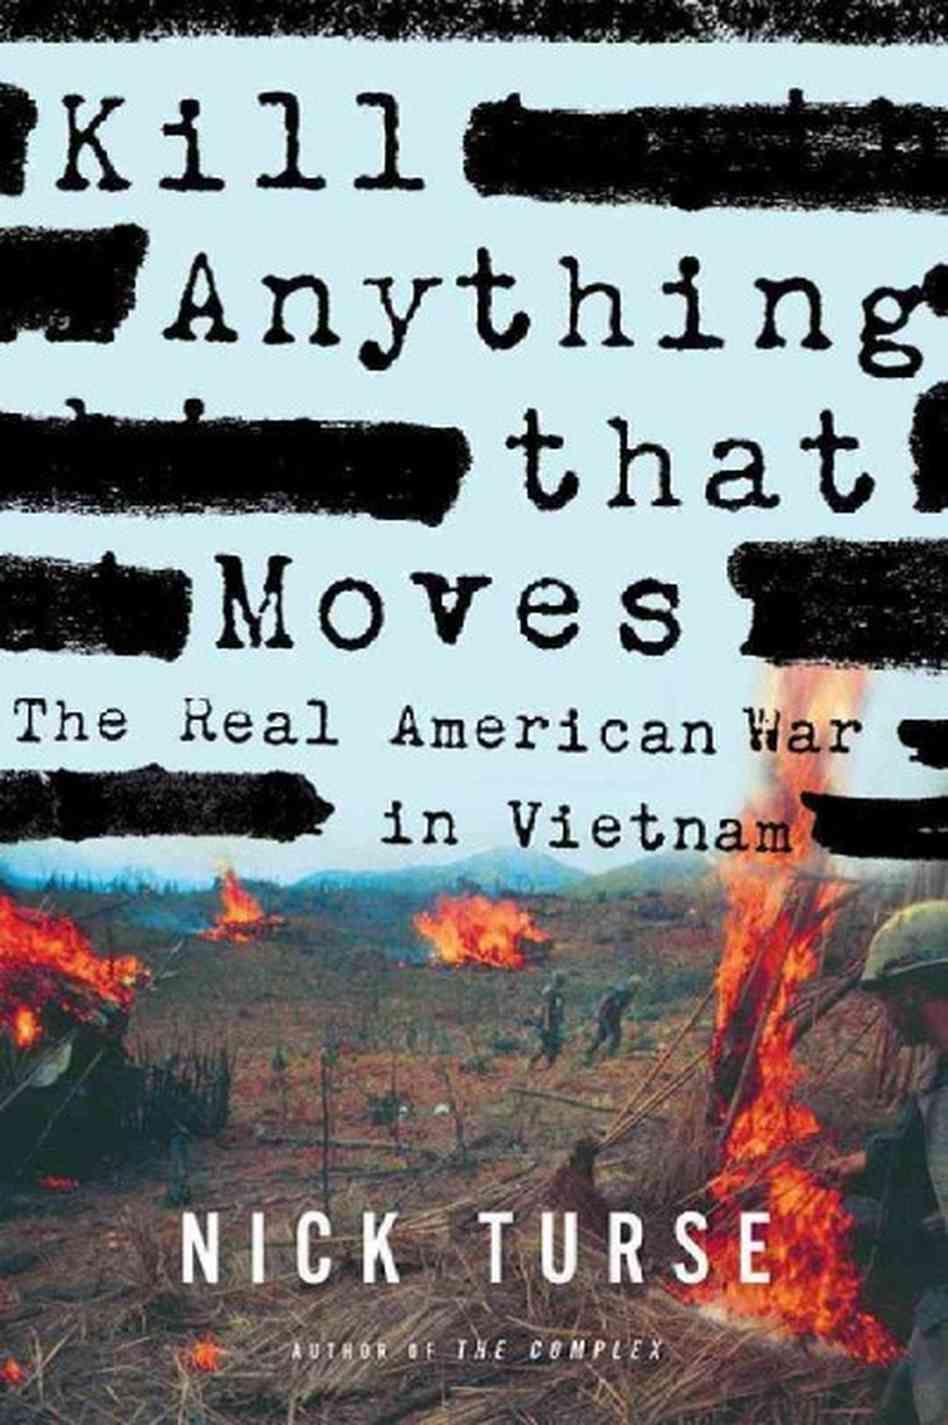 A Nation Unhinged: The Grim Realities of “The Real American War” 